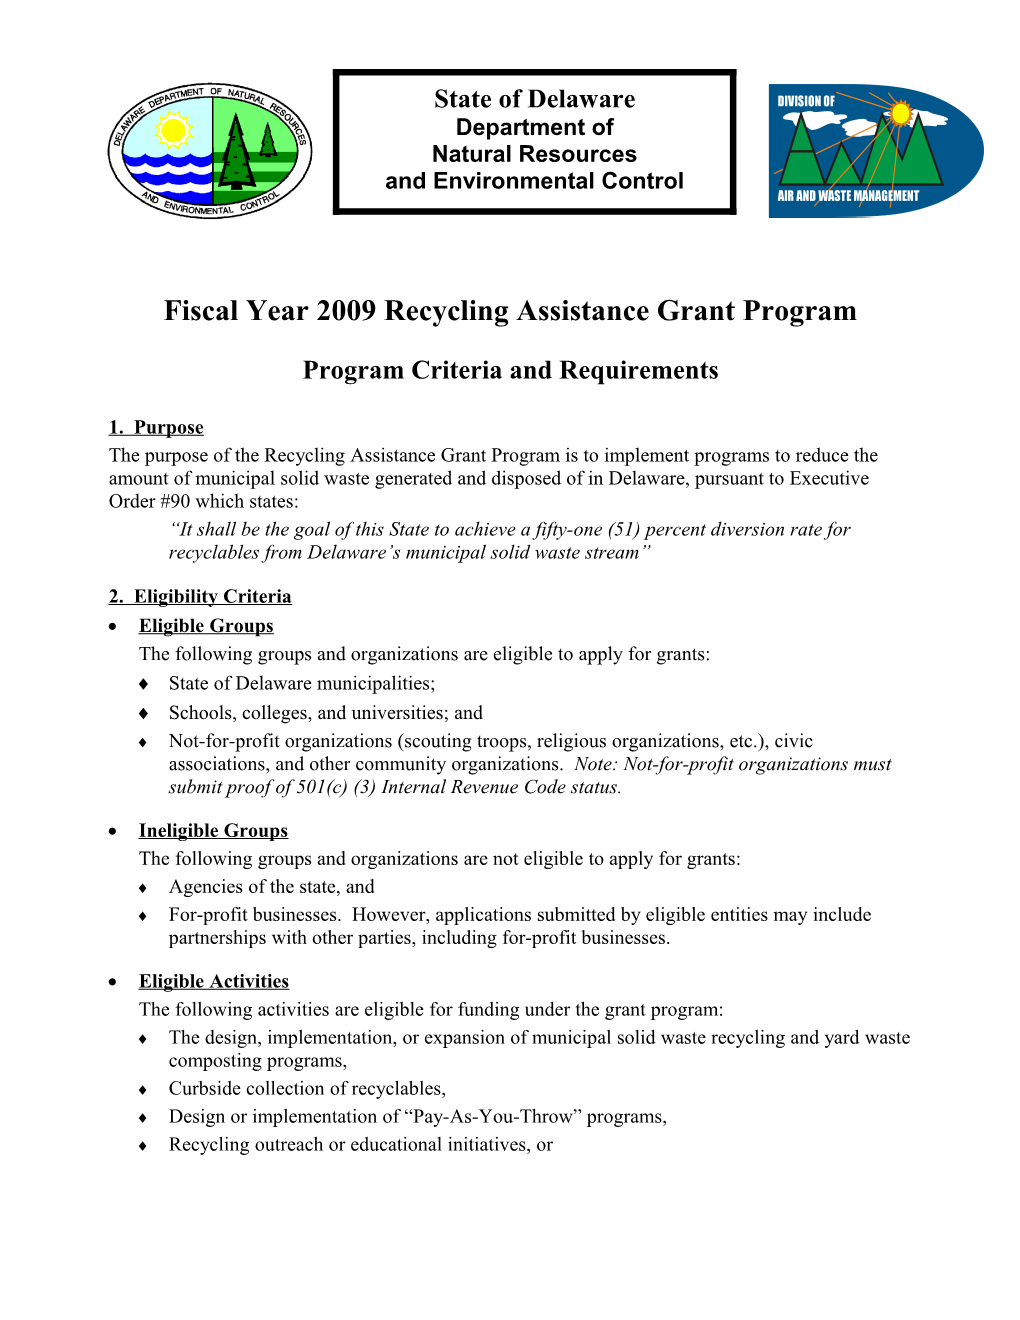 DNREC, FY2009 Recycling Assistance Grant Programpage 1 of 7